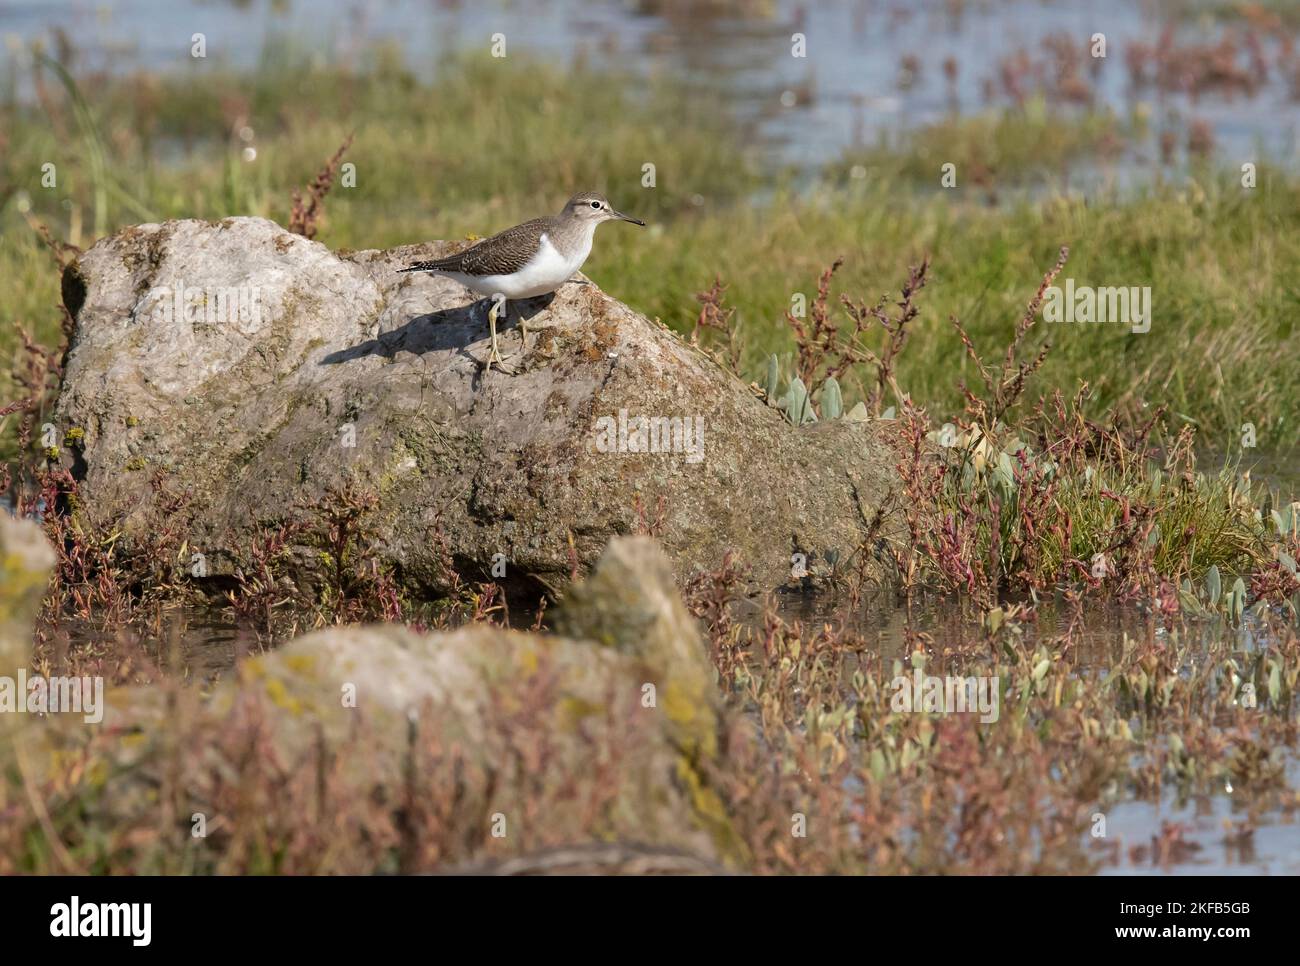 Common Sandpiper taken at Connahs Quay nature reserve on the Dee Estuary, North Wales, Great Britain, UK Stock Photo